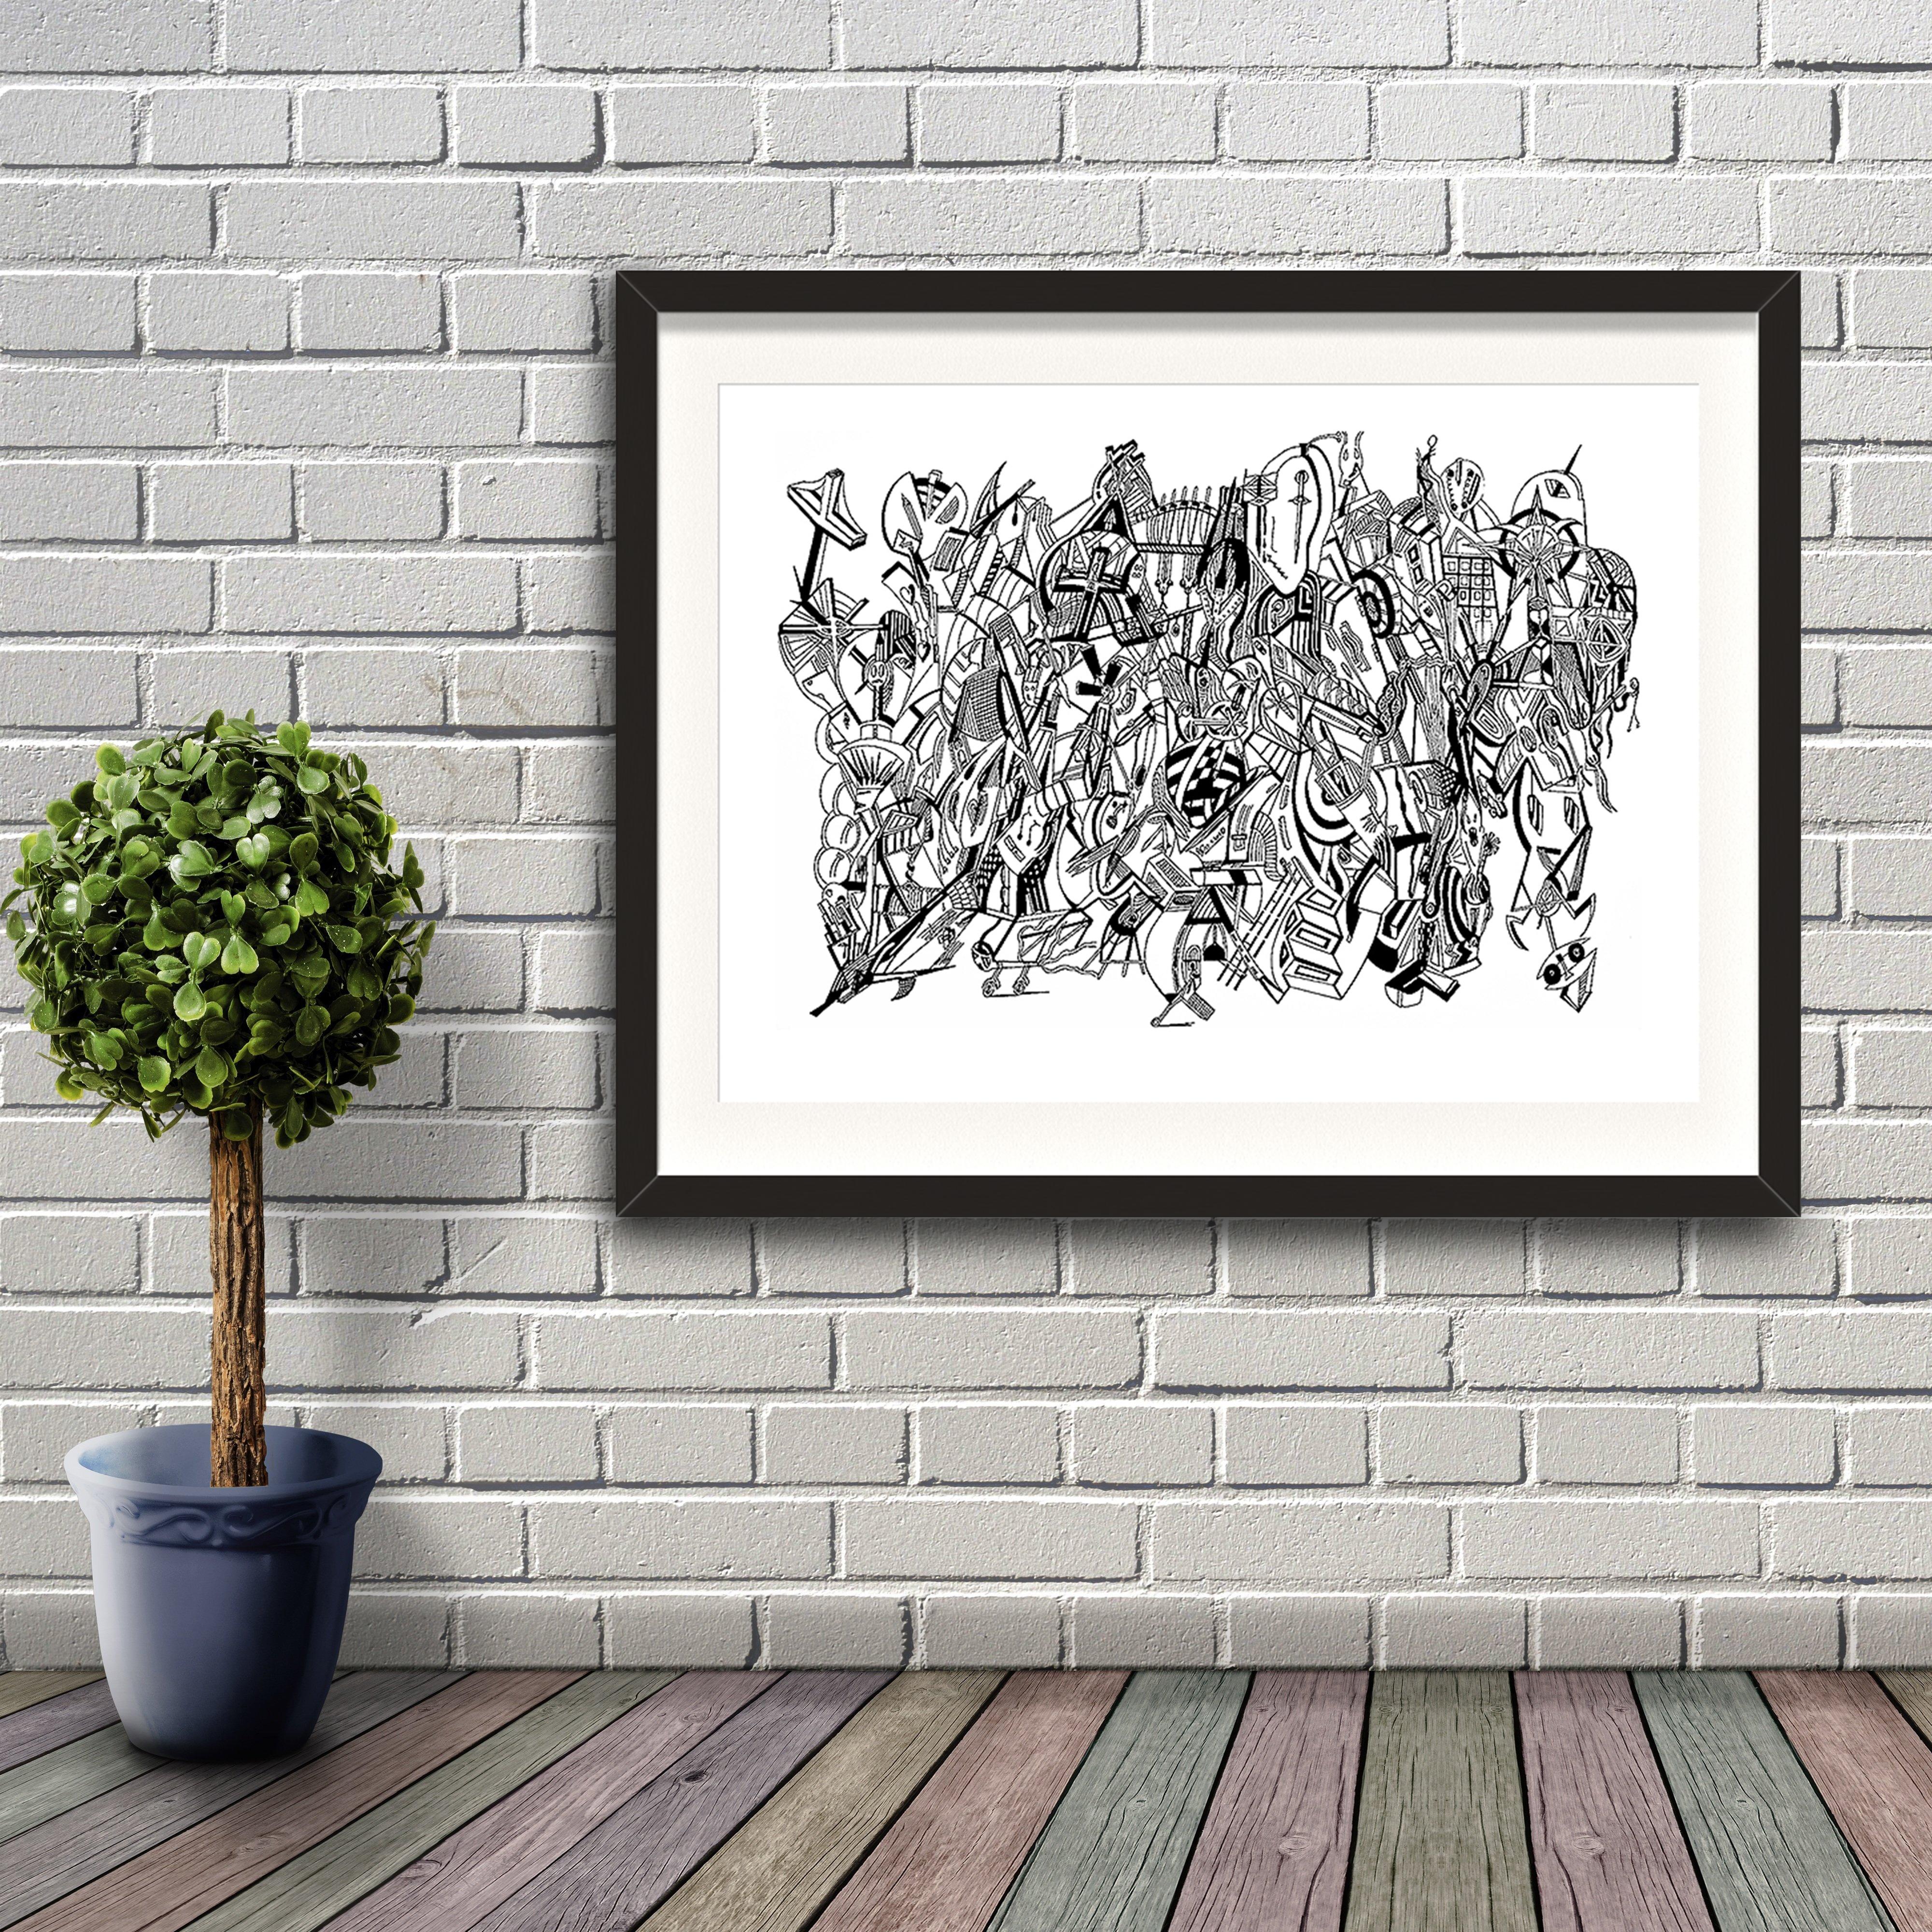 A fine art print from Jason Clarke titled Crosses drawn with a black Pentel pen. Artwork shown in a black frame hanging on a brick wall.